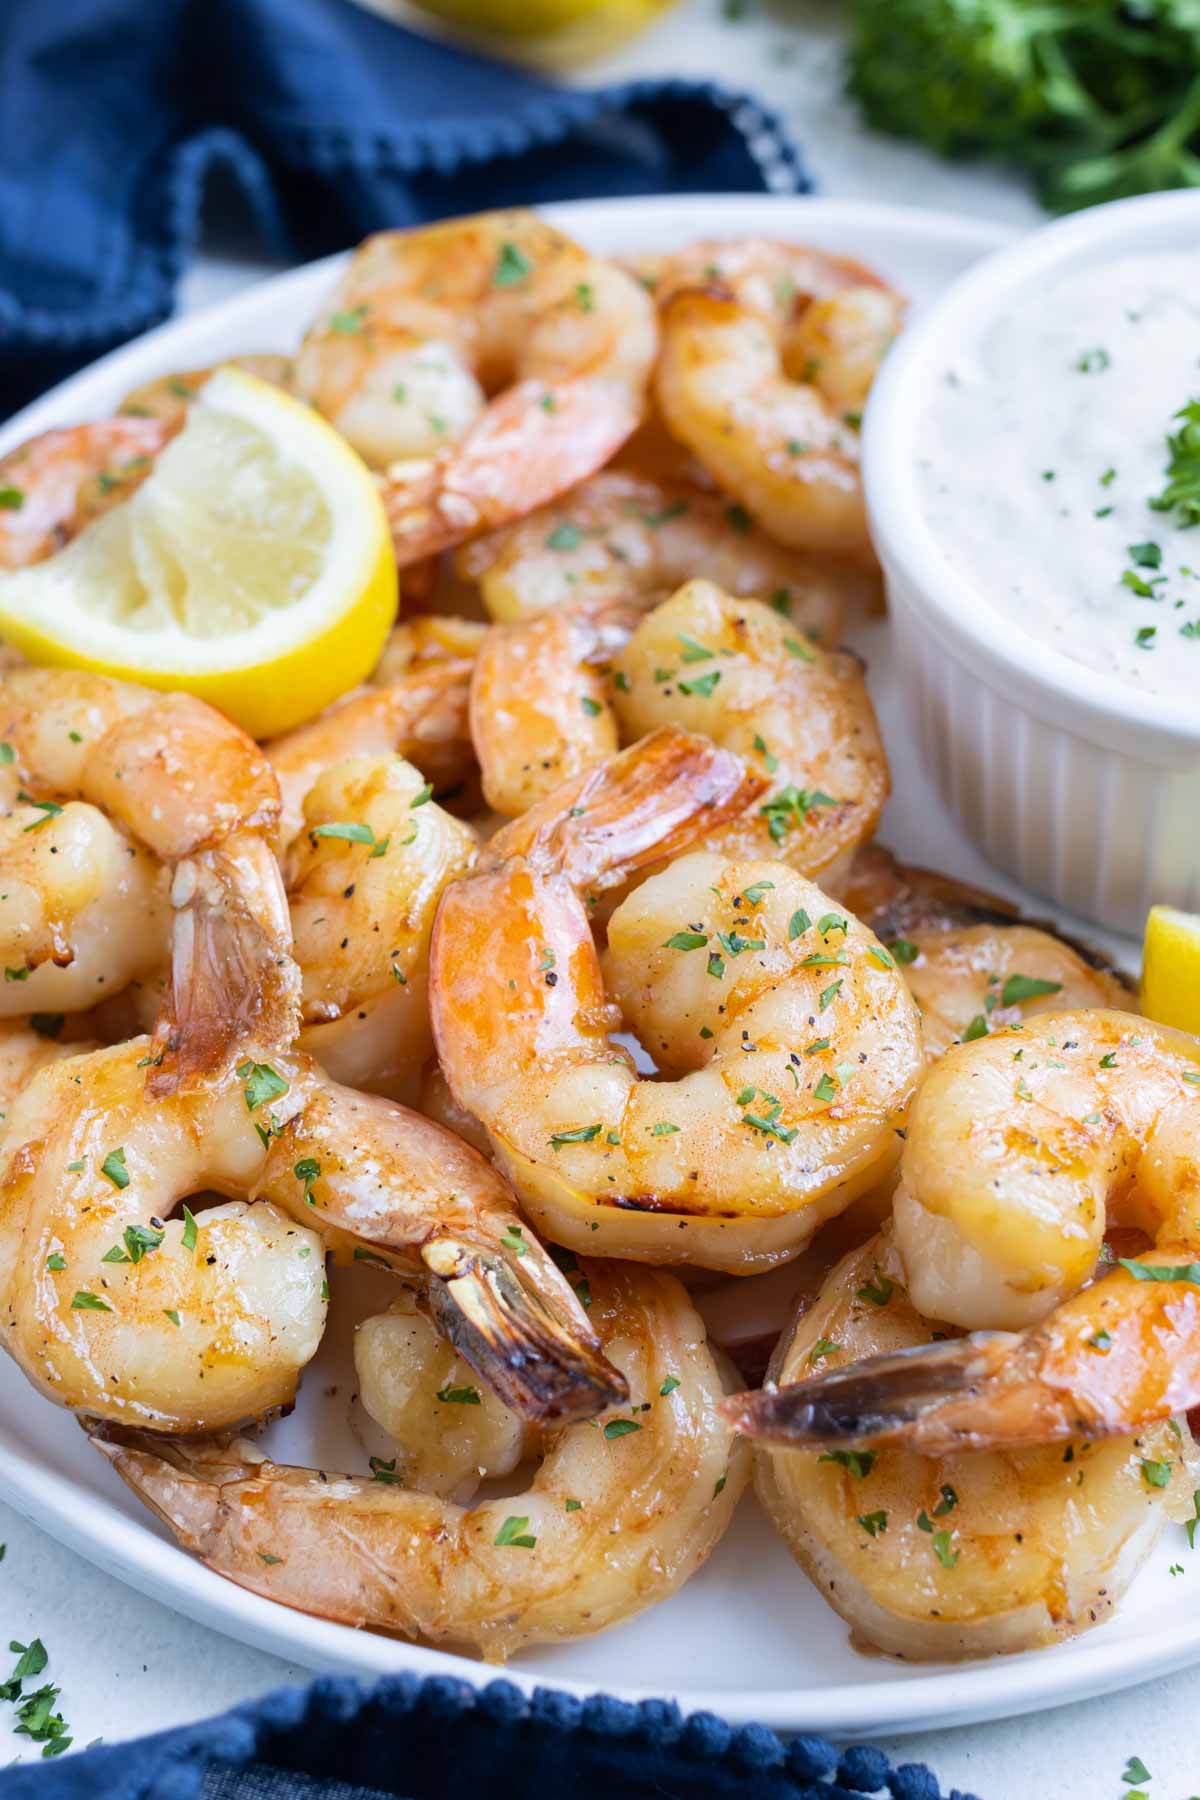 Shrimp is a delicious seafood dinner.